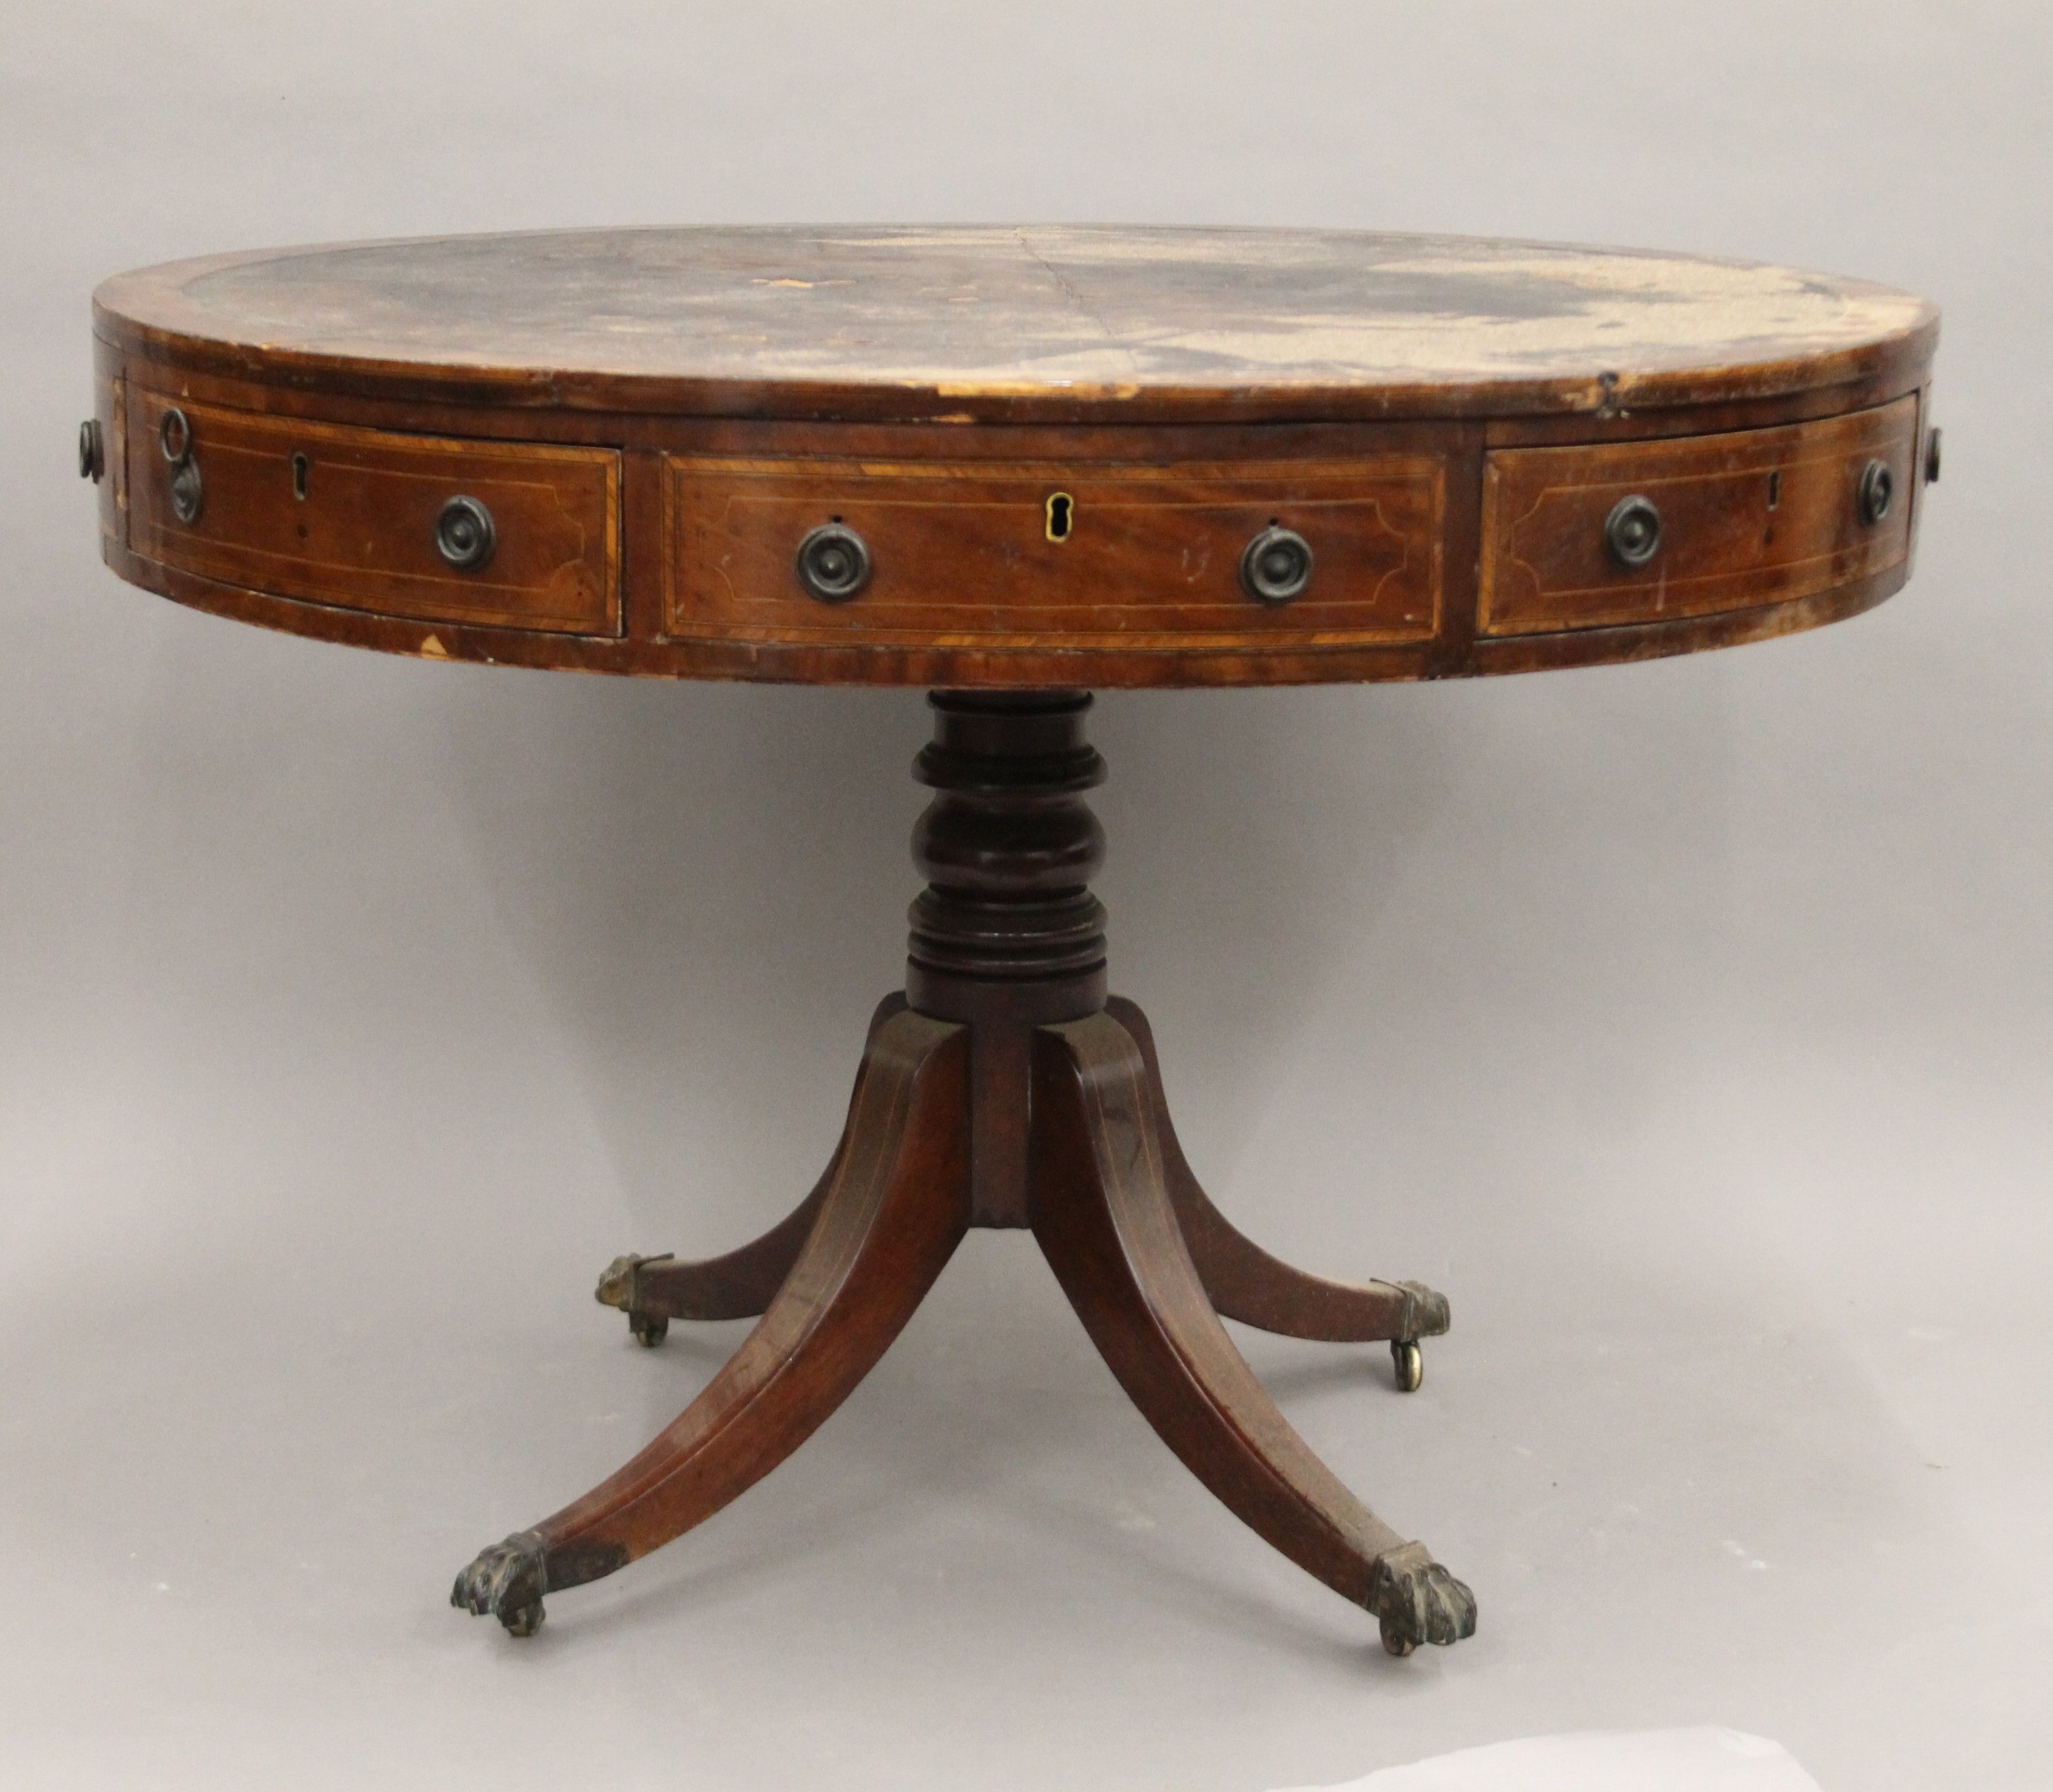 A 19th century mahogany drum table. Approximately 98 cm diameter. - Image 2 of 8